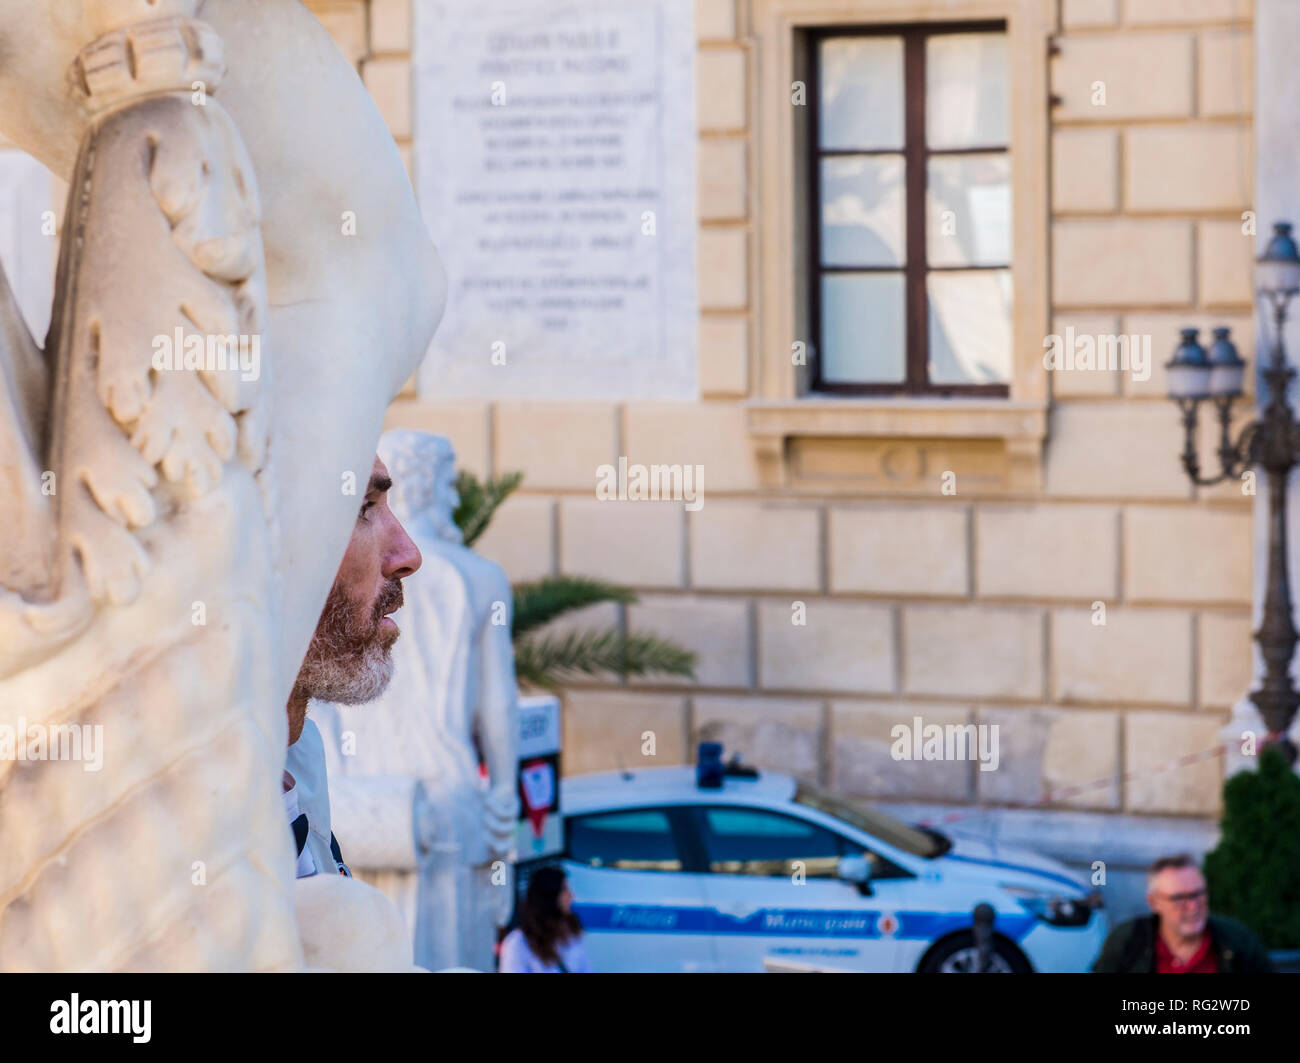 Man's face peering out from in-between statues, Palermo City, Sicily, Italy, Europe Stock Photo